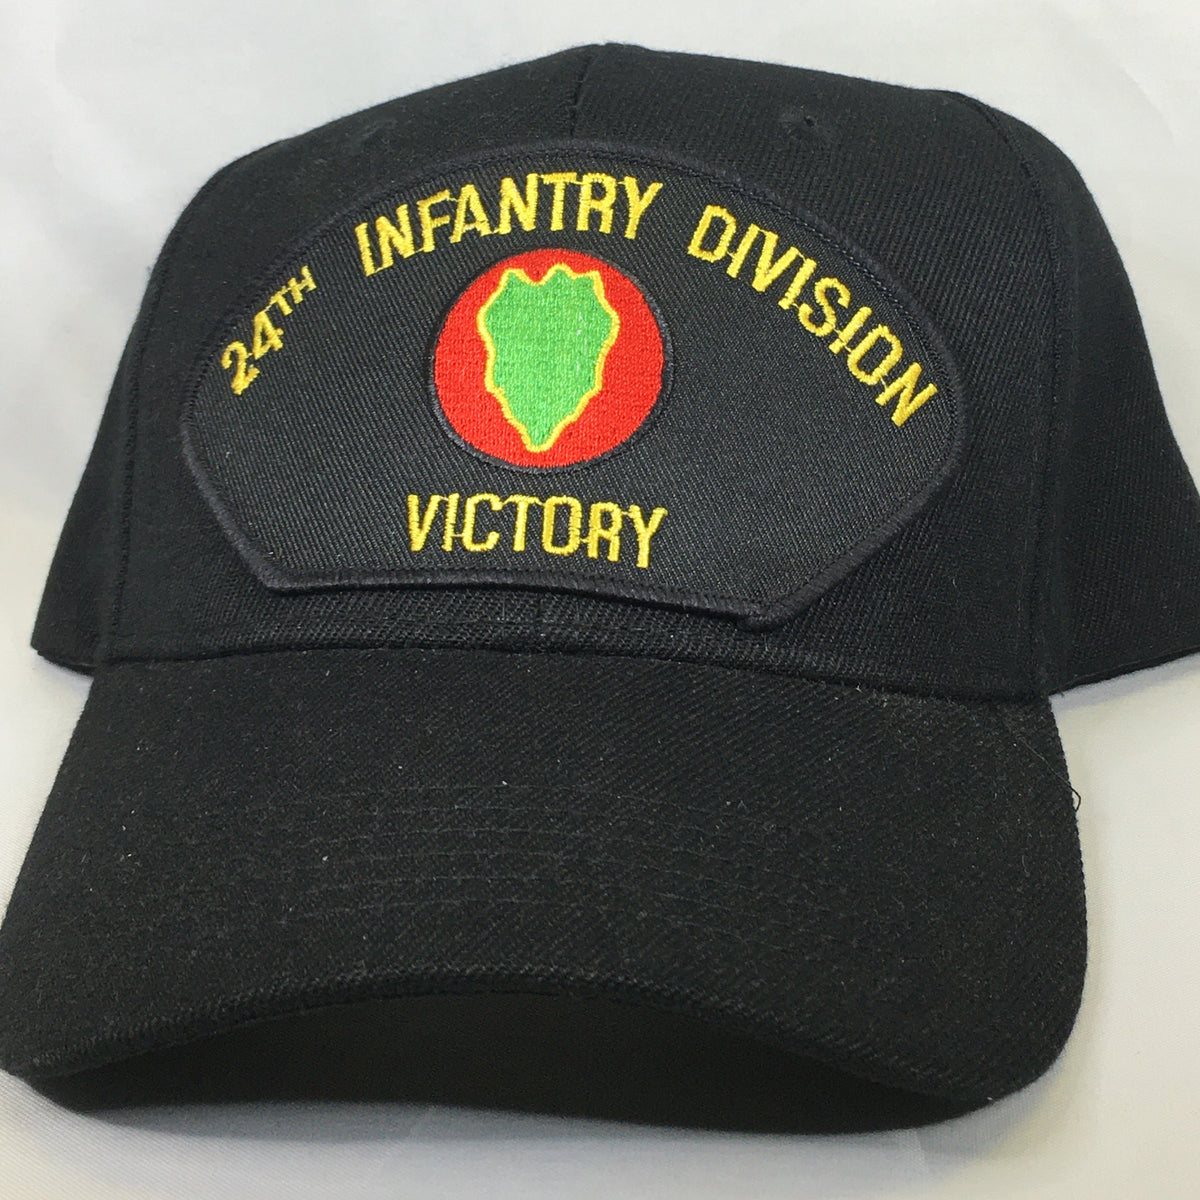 24th Infantry Divsion Victory Cap